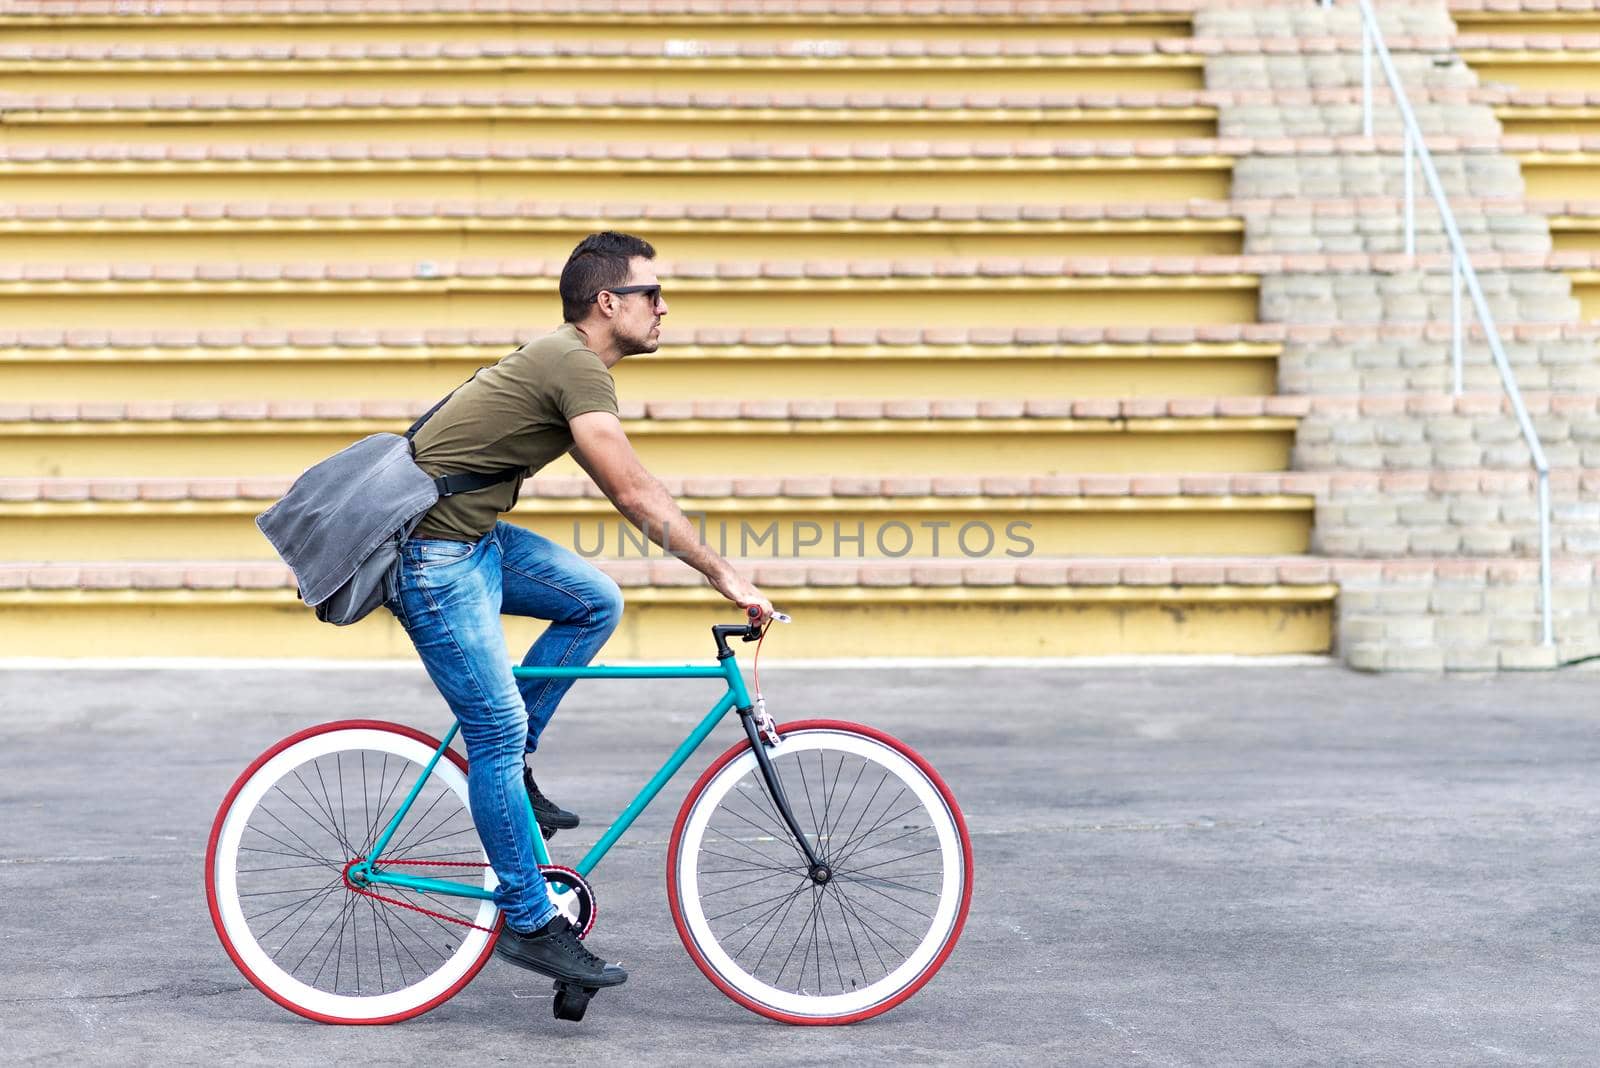 Man with sunglasses riding bicycle in urban city commuting trendy transportation by raferto1973